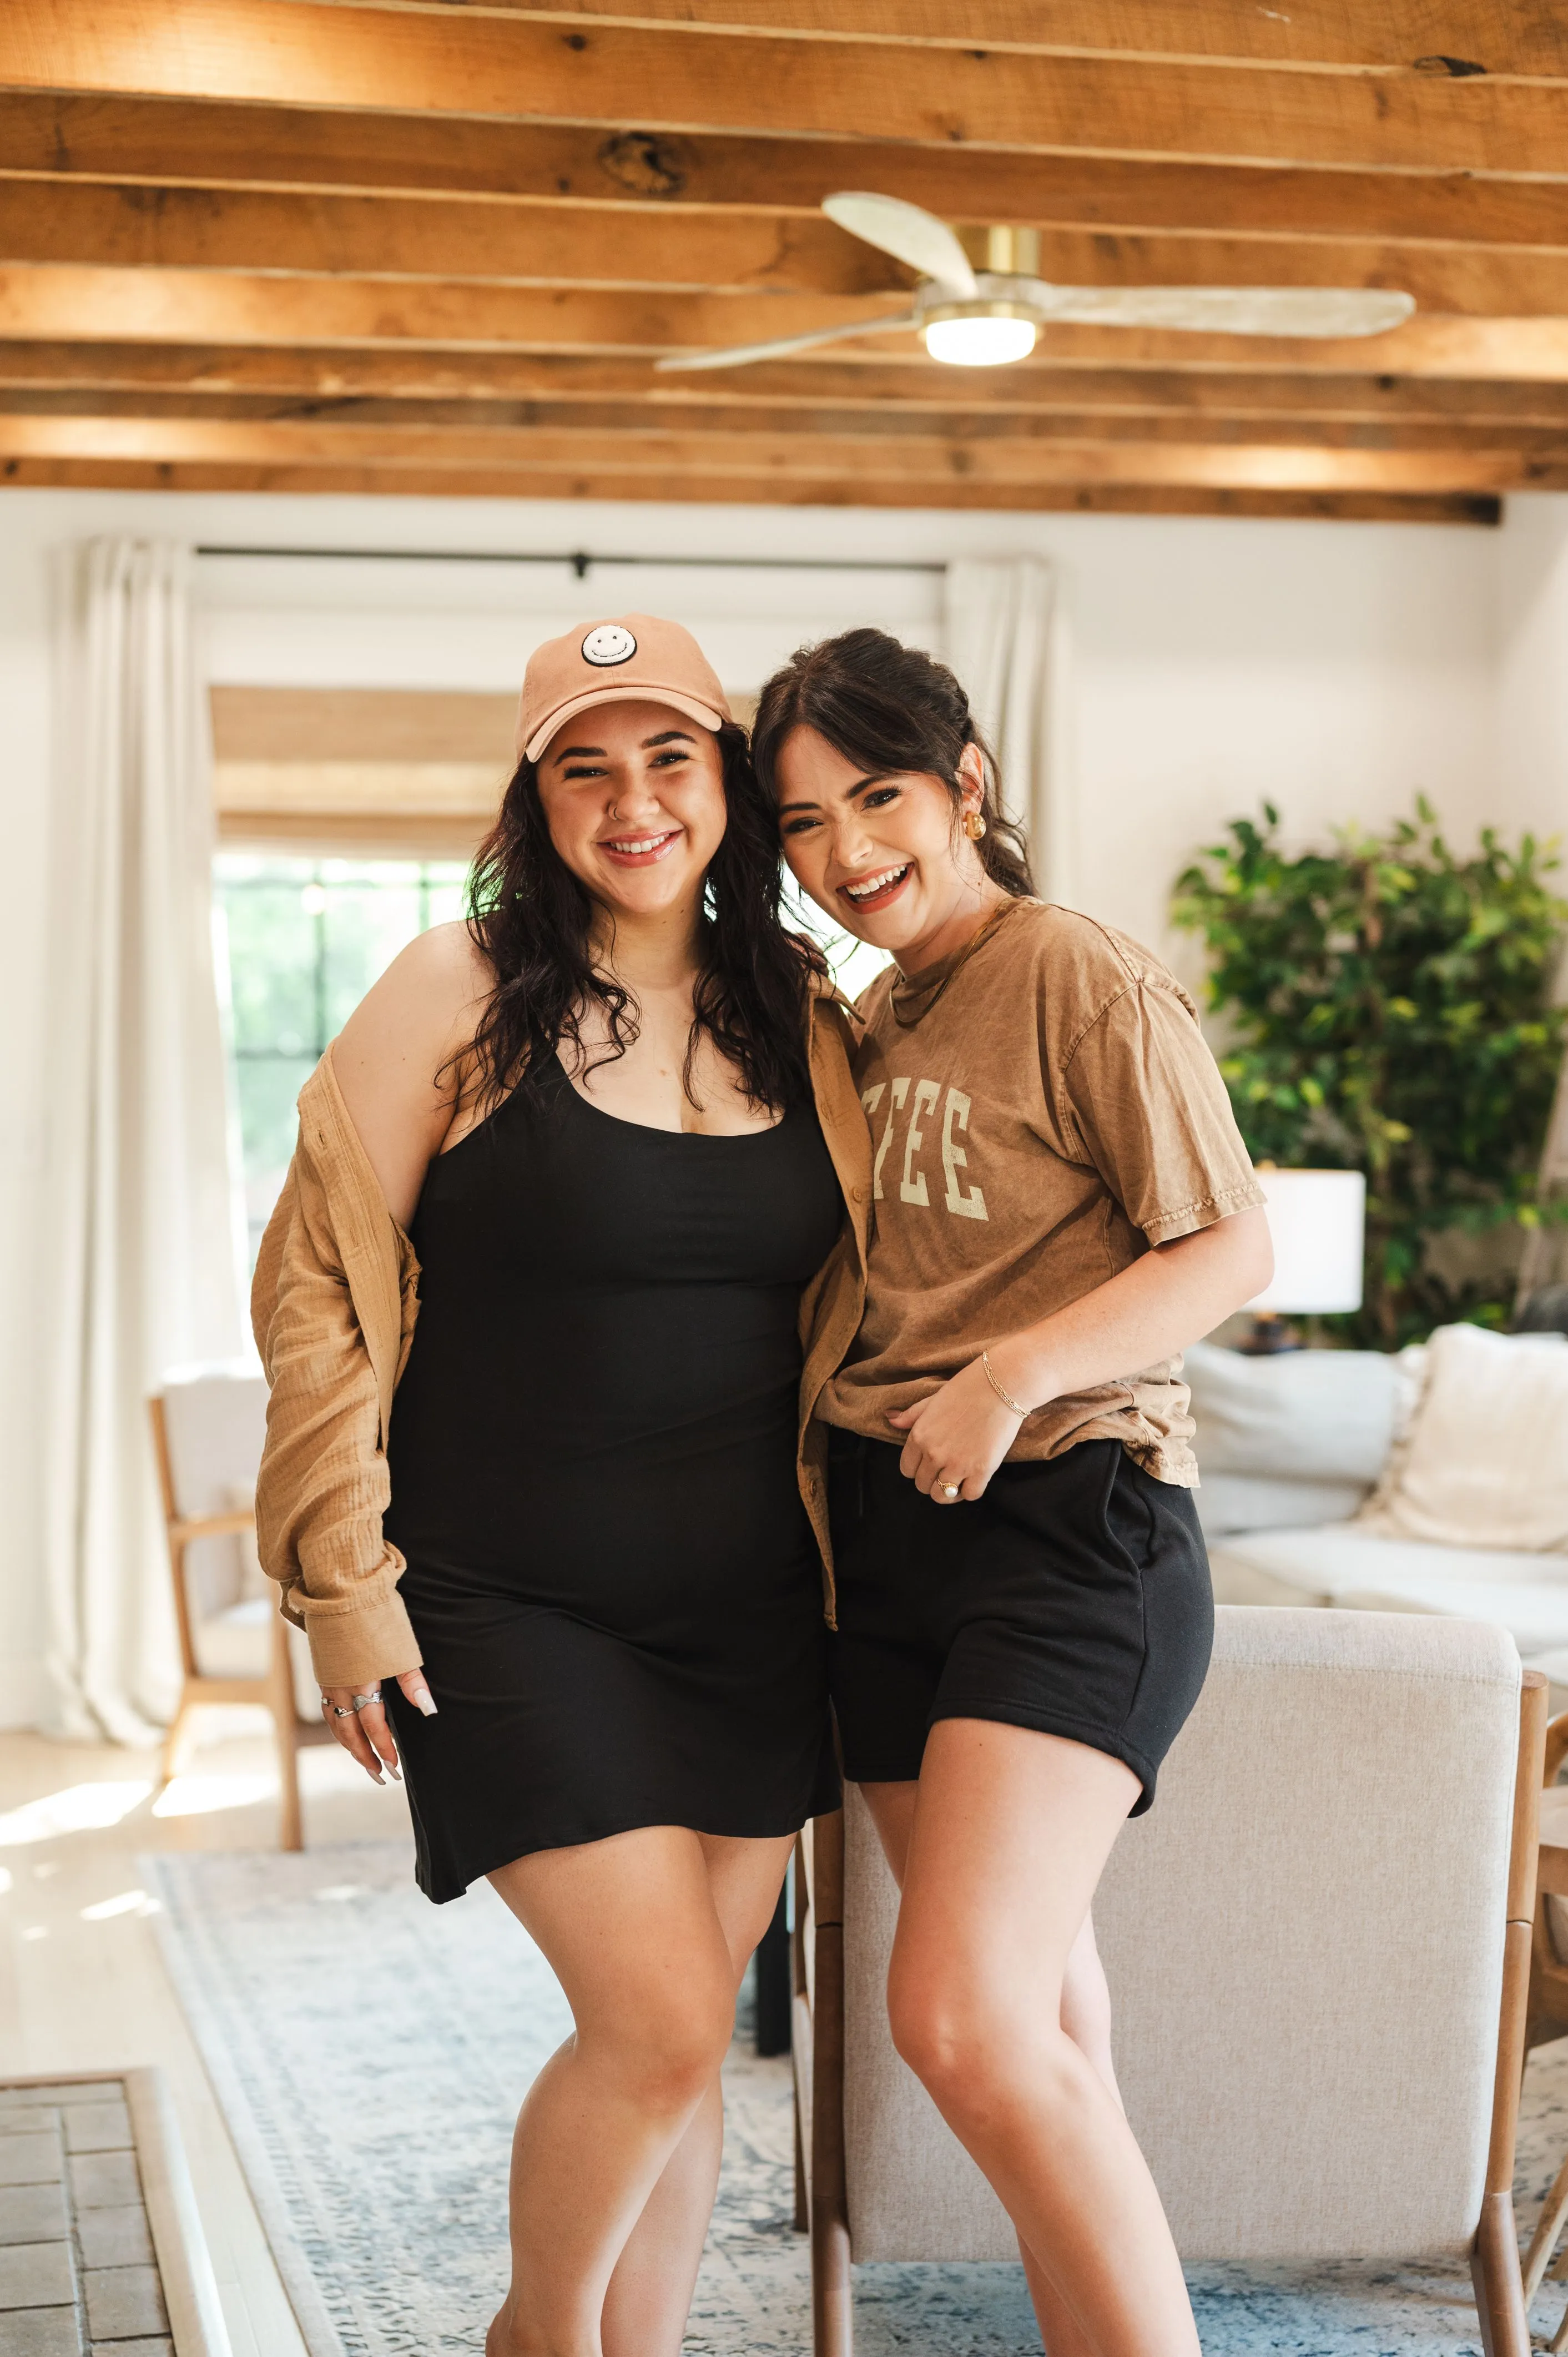 Two smiling women standing together with arms around each other in a cozy living room setting.